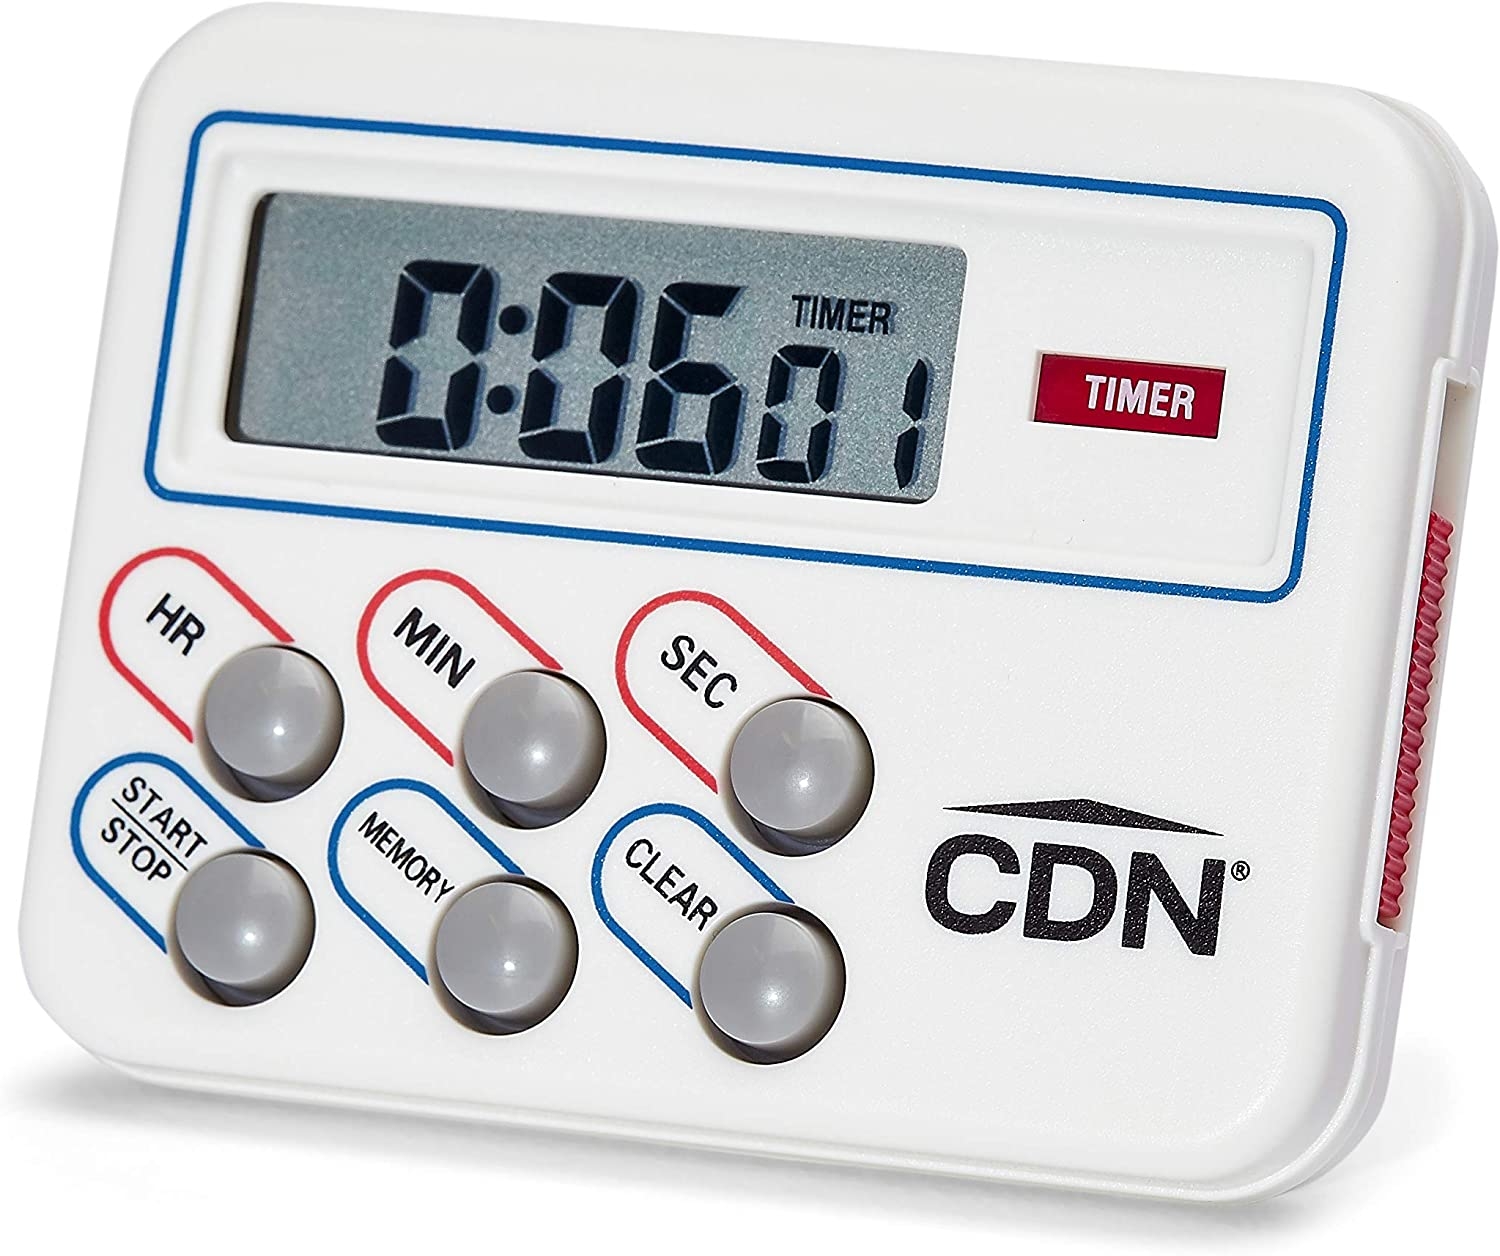 CDN Digital Timer and Clock Memory Feature, 6.8 x 4.5 x 0.9 inches, Cream Import To Shop ×Product customization General